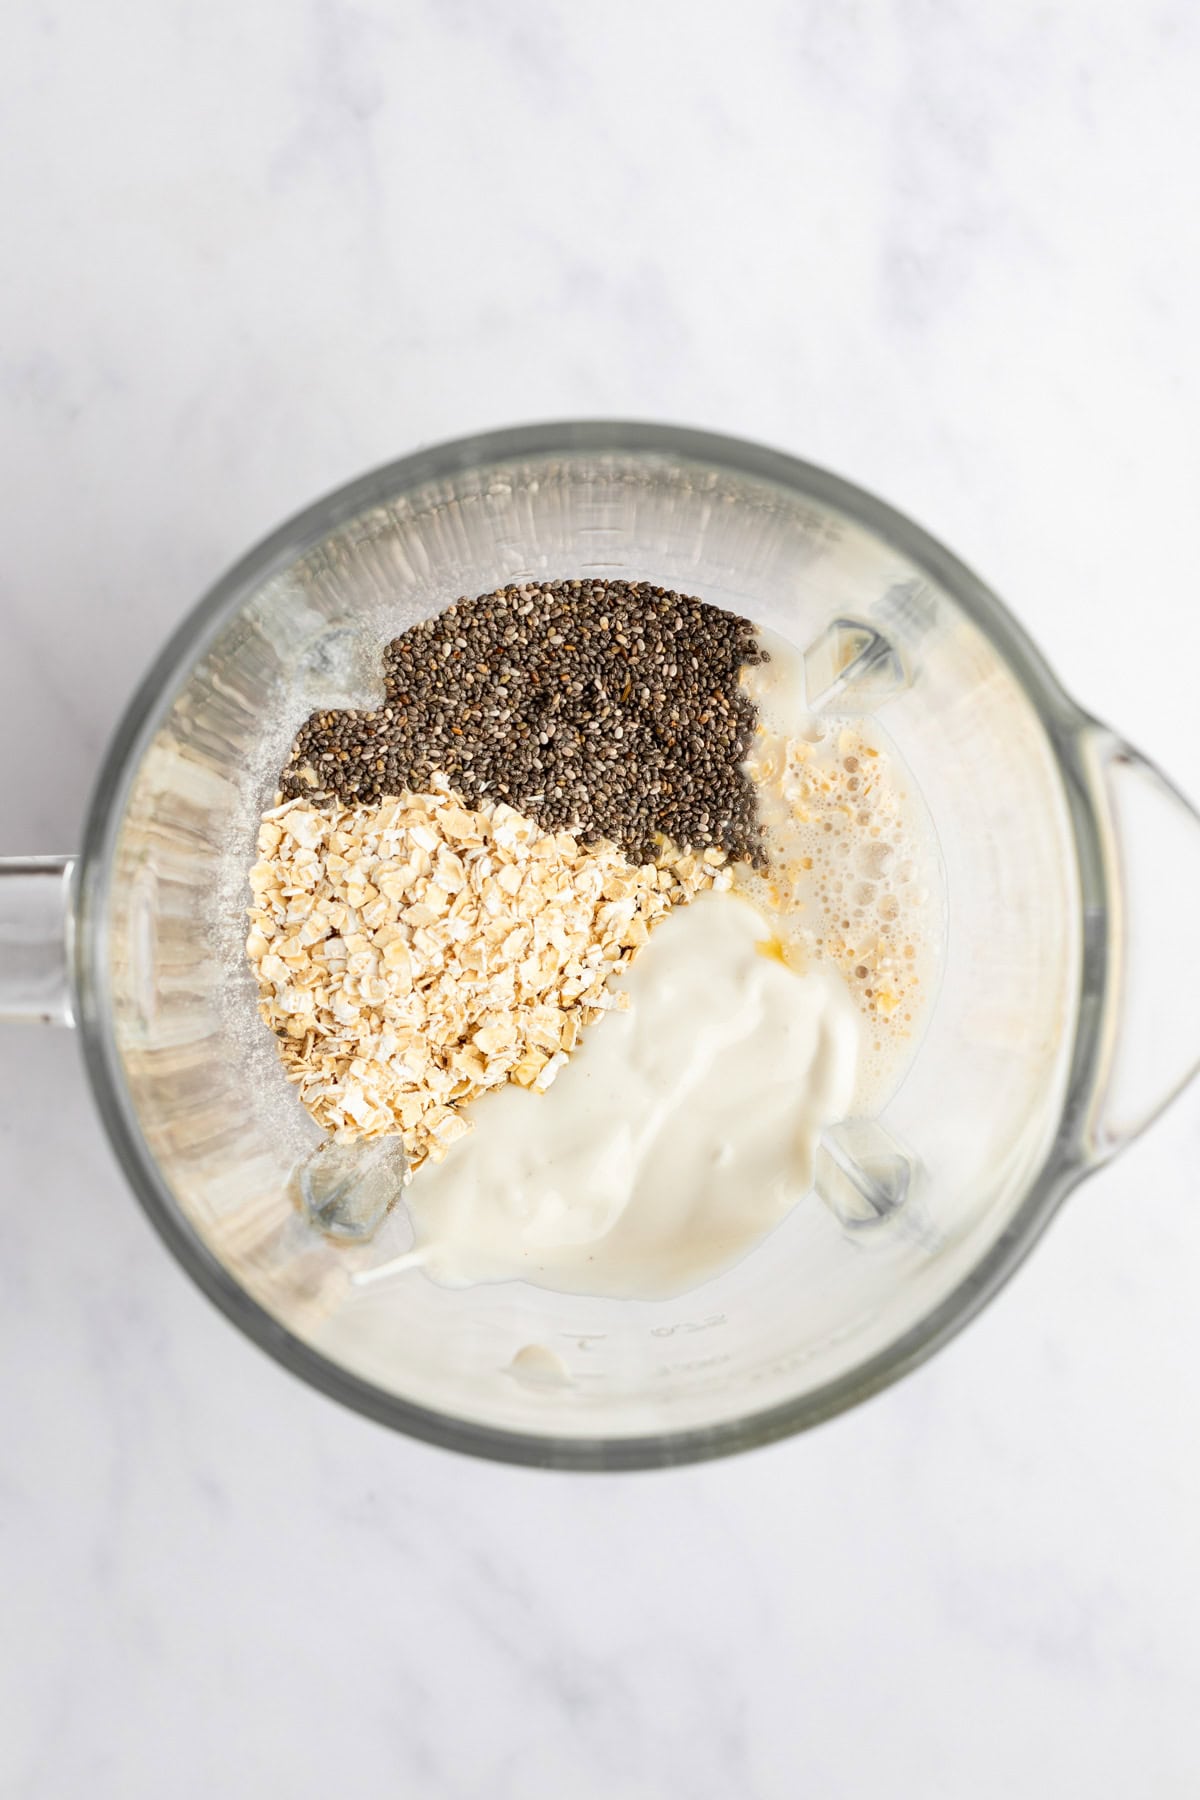 A blender containing chia seeds, oats, a white creamy substance, and liquid viewed from above on a light-colored surface.